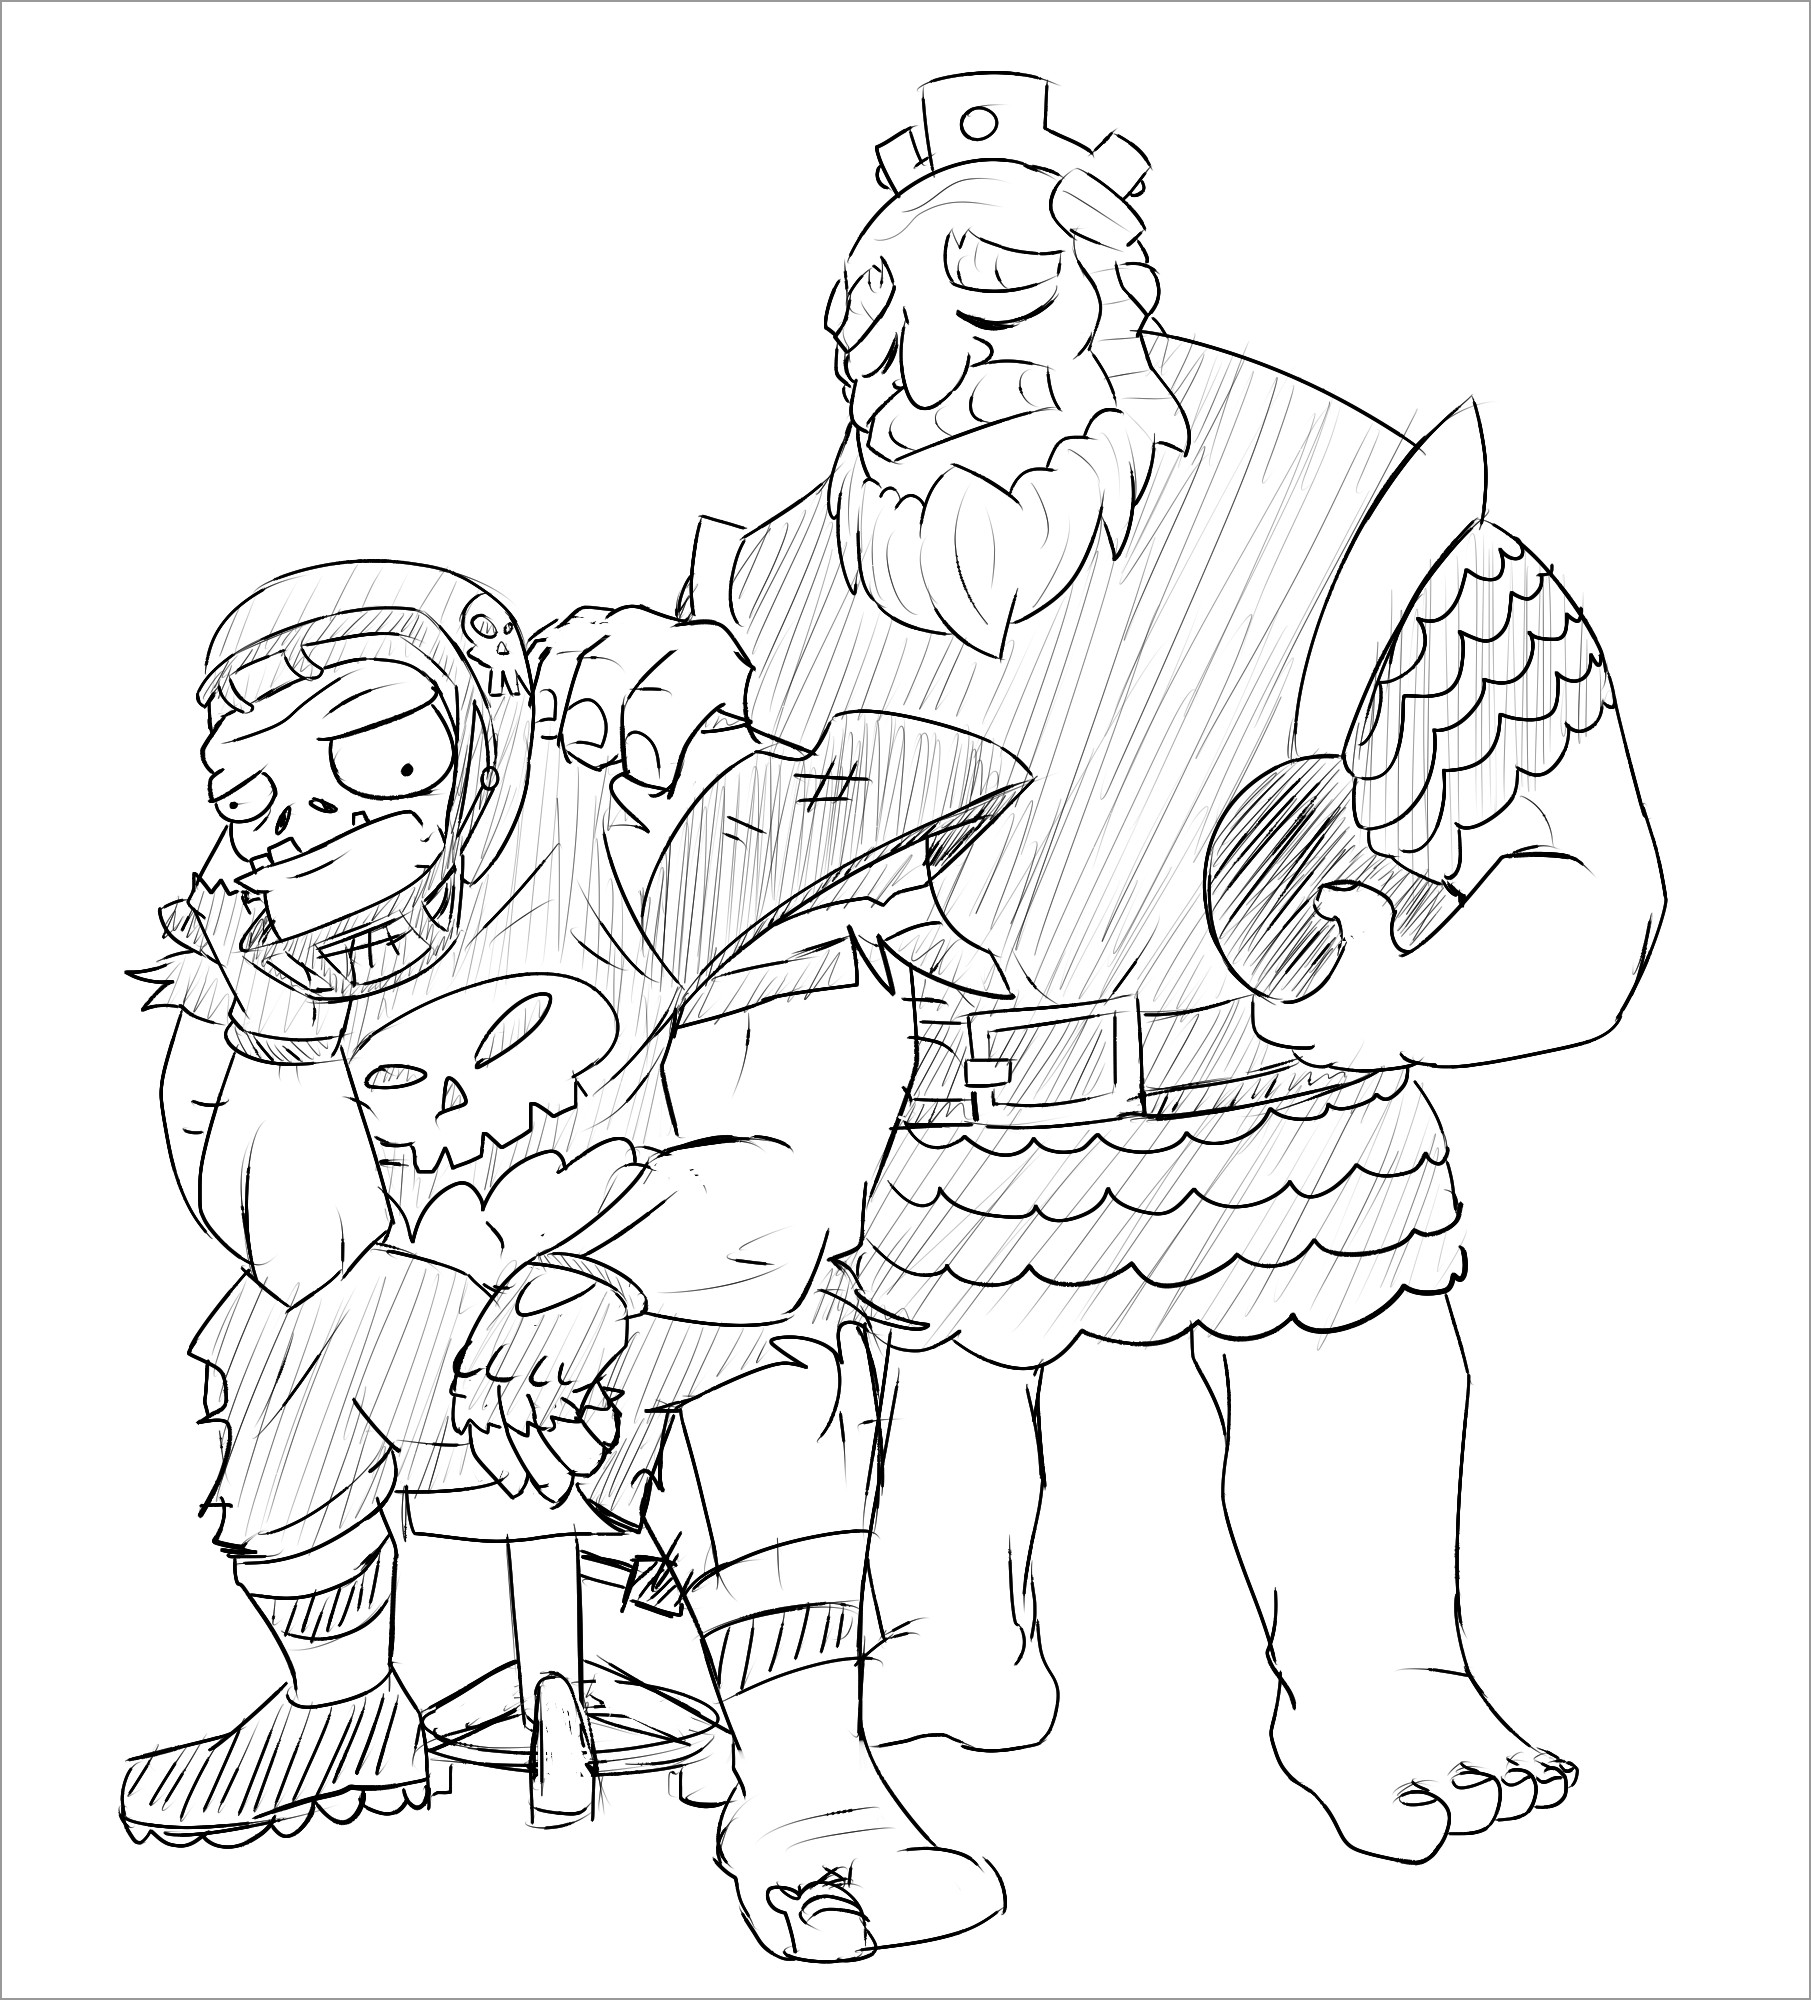 Crammed Clash Roy Clash Of Clans Coloring Page